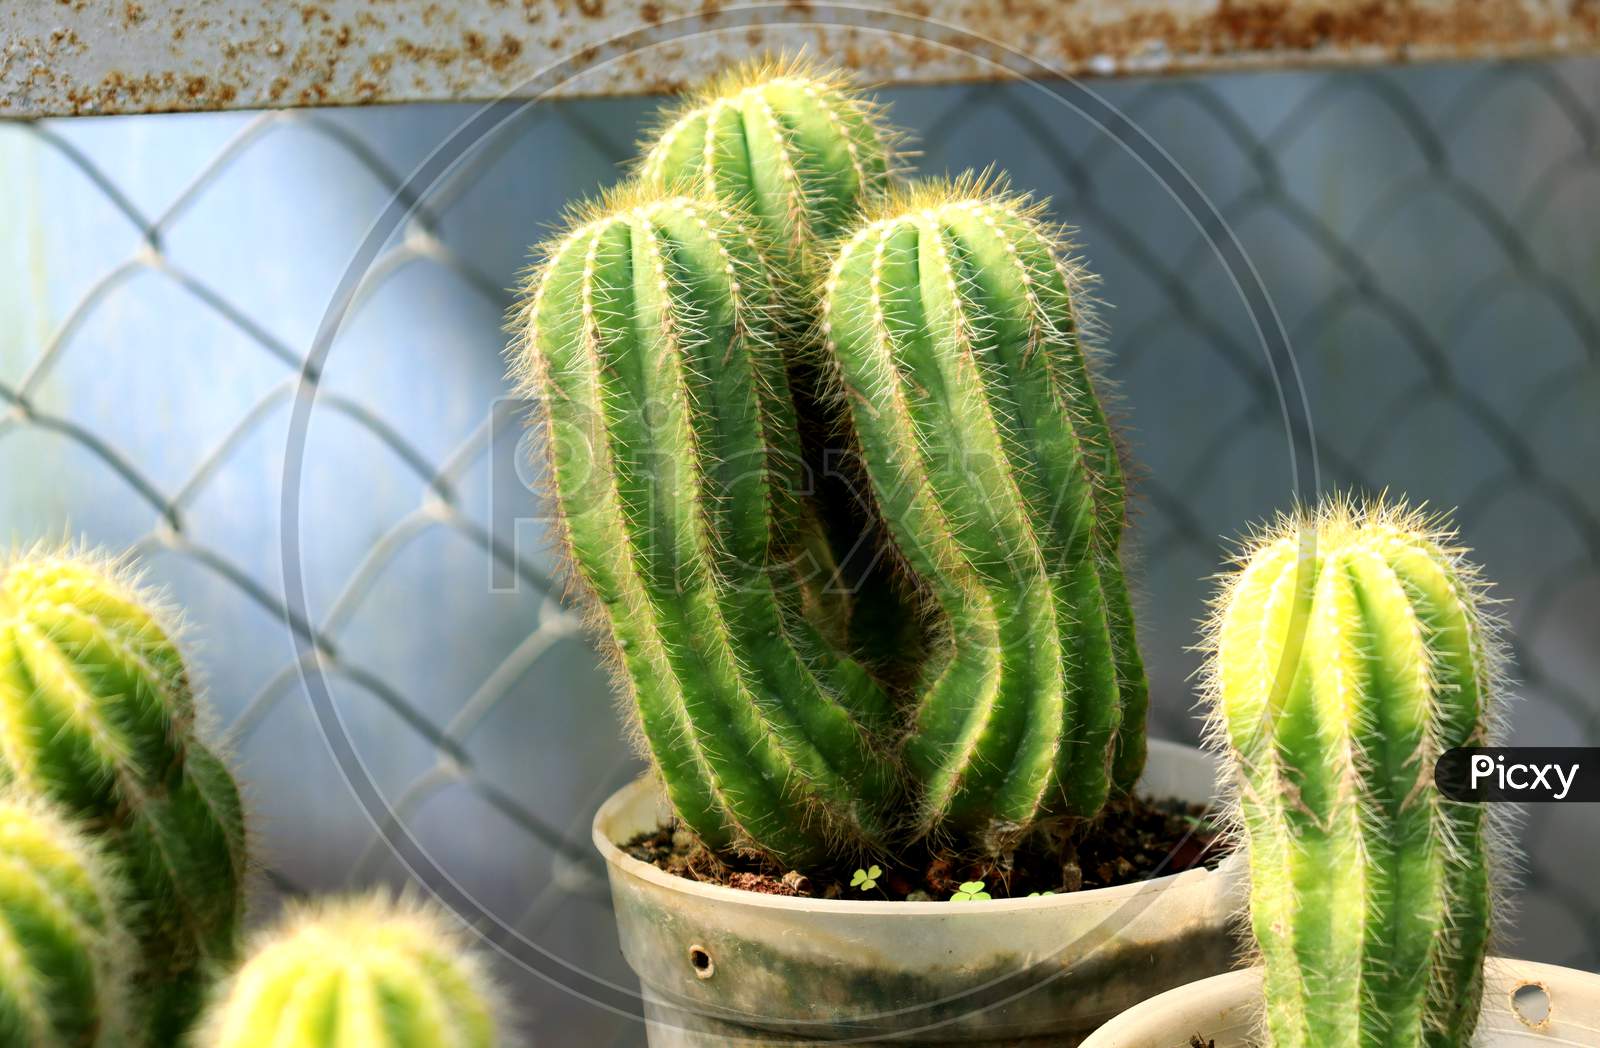 Cactus On A Tub,Closeup Photo Of A Cactus With Read Buble,Selective Focus,Home Decoration,Plant Of Dry And Hot Climates Area,Darjeeling,India